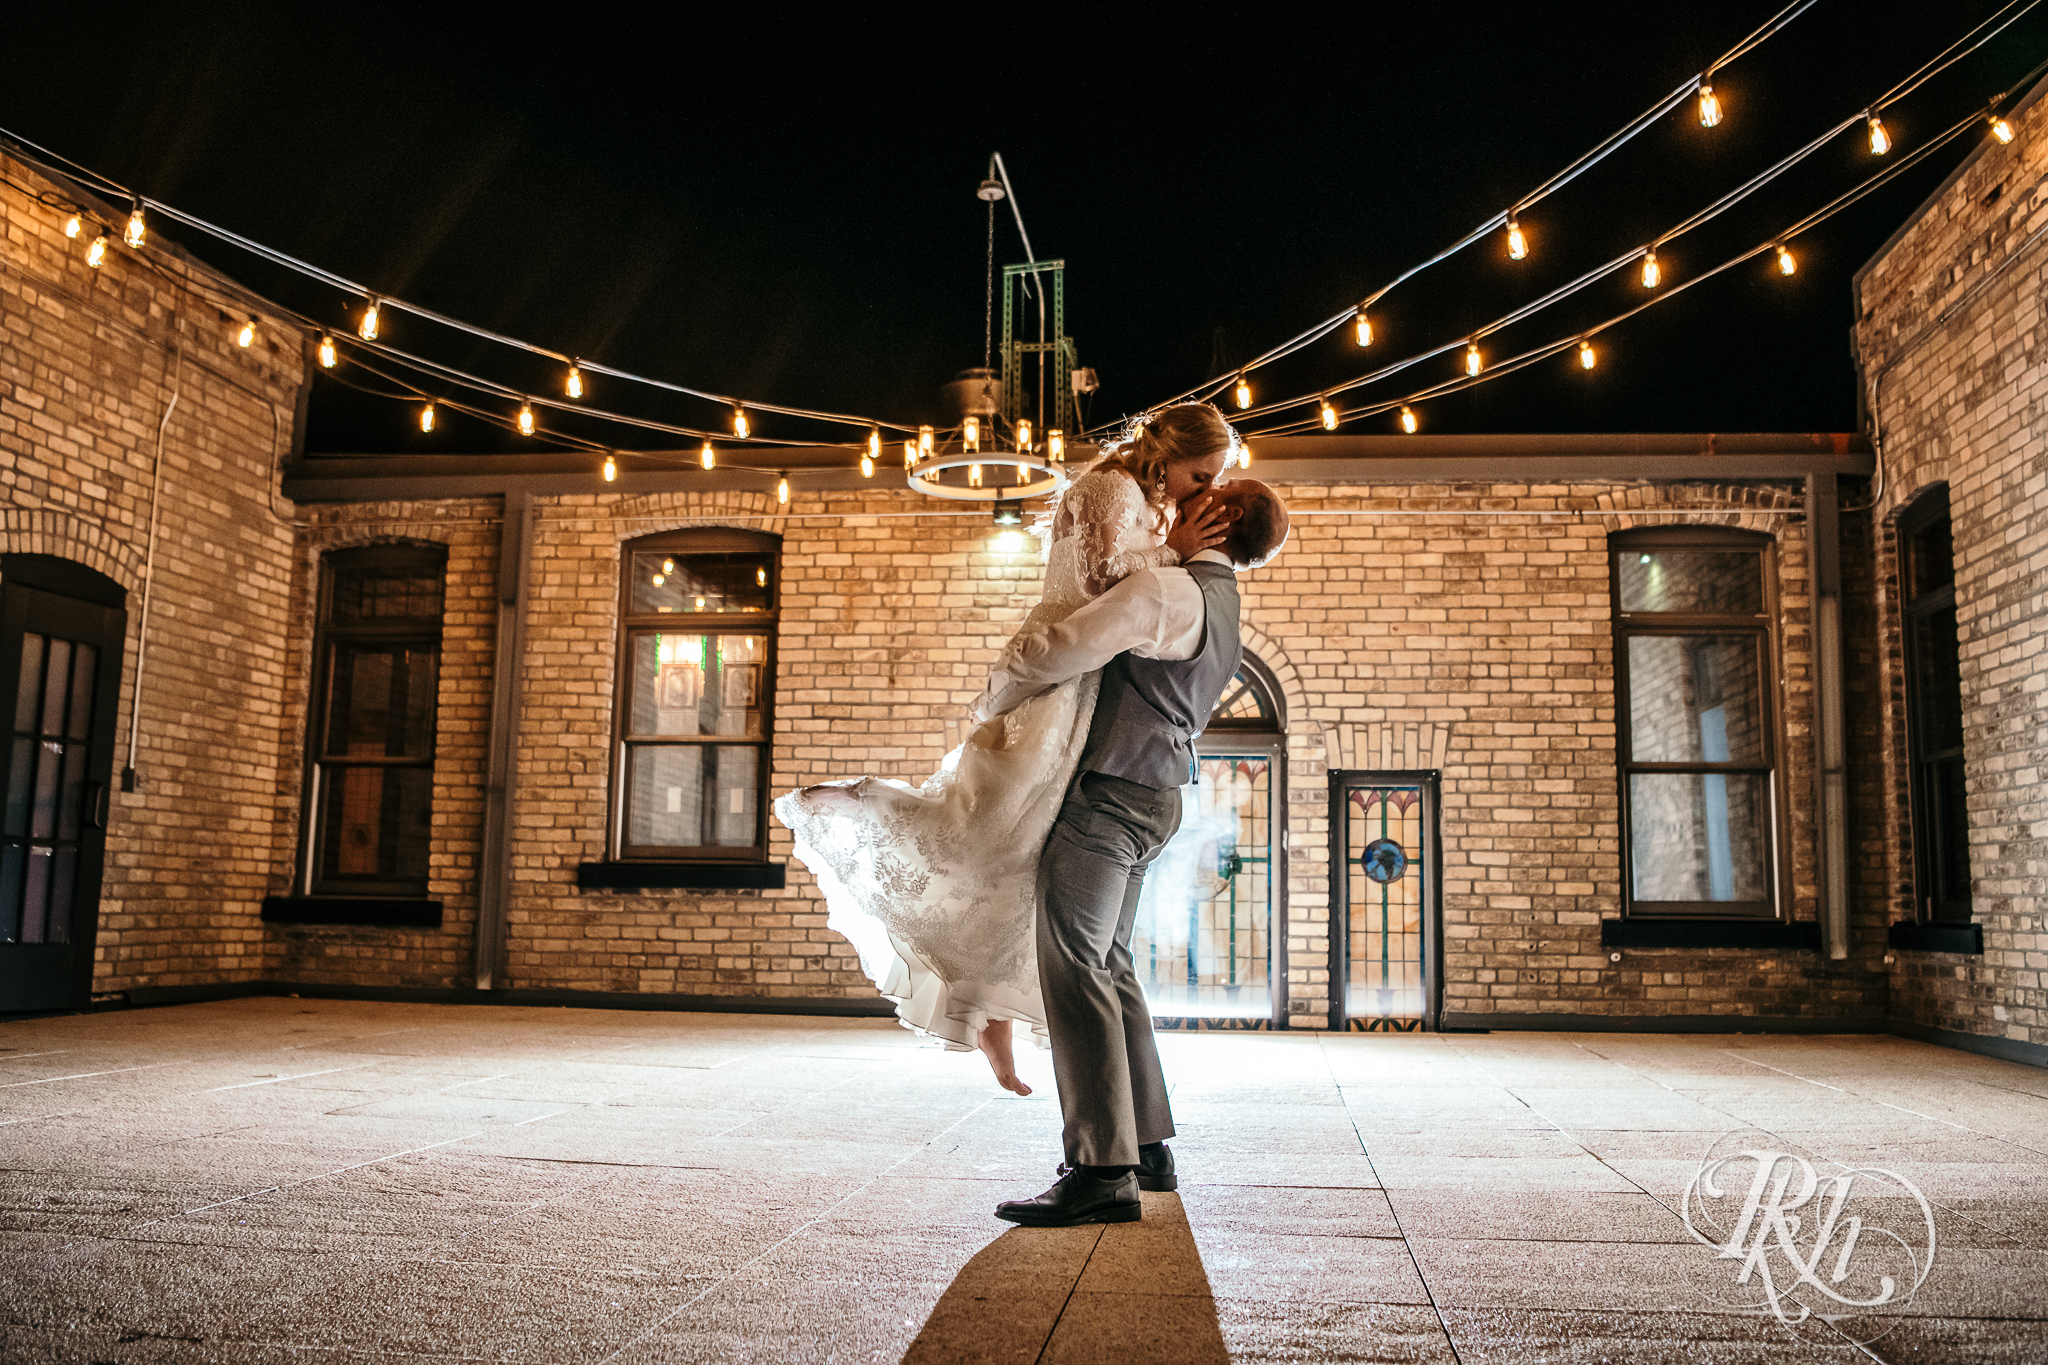 Groom lifts and kisses bride under lights at night at Weddings at the Broz in New Prague, Minnesota.